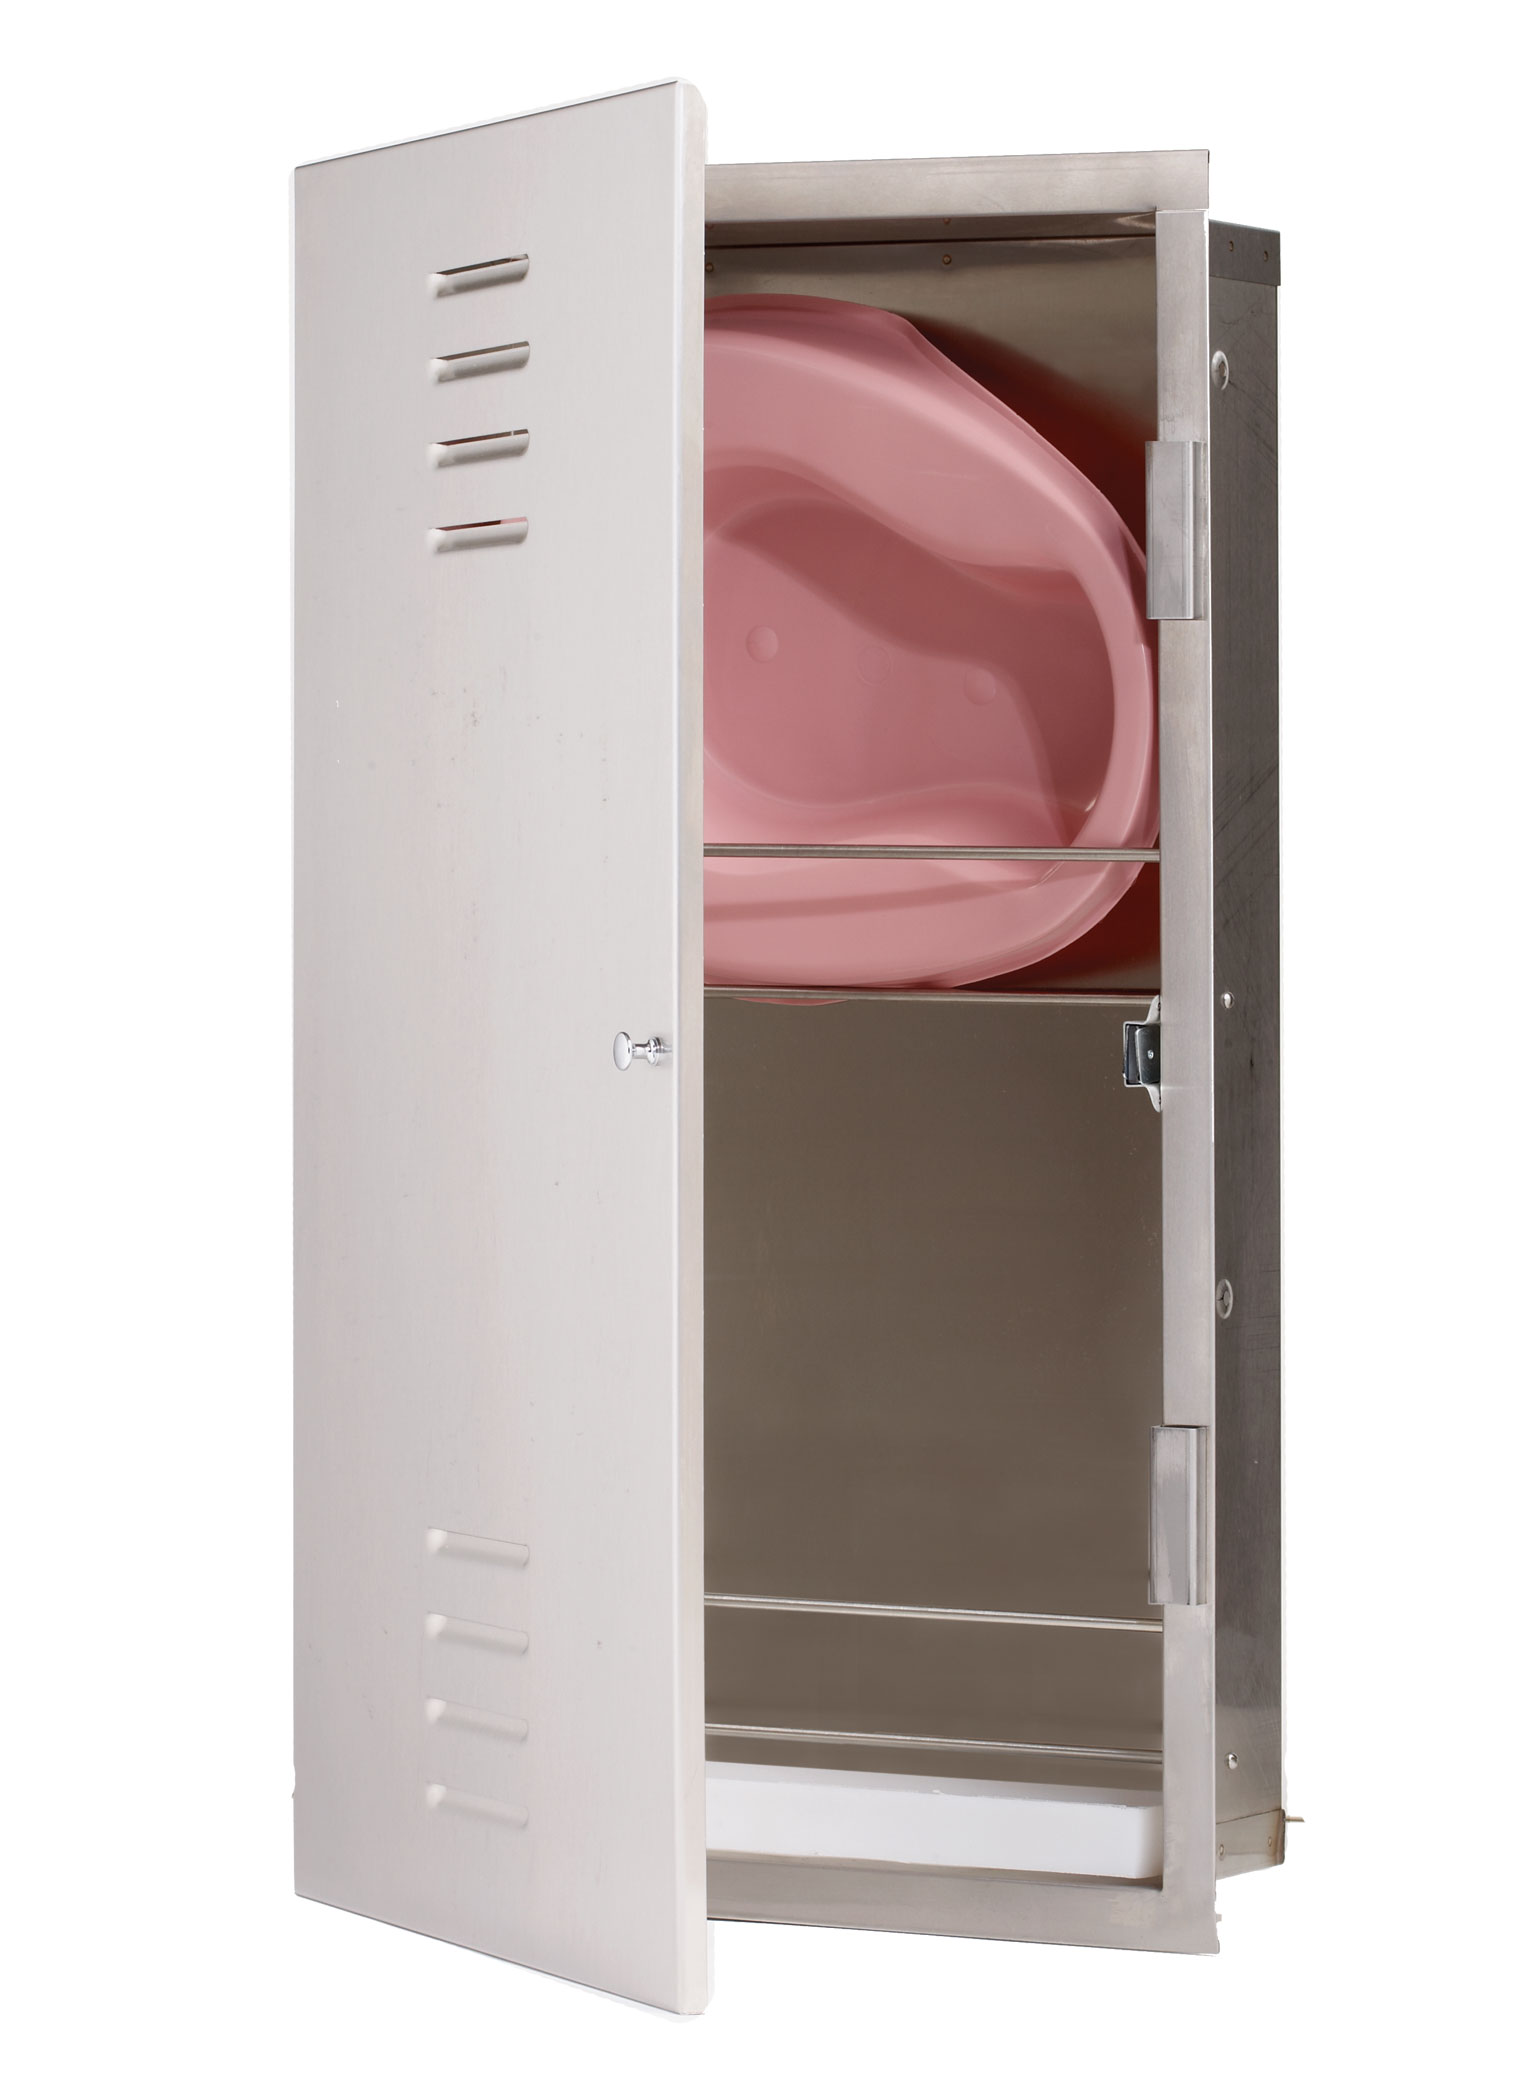 Recessed mounted satin finish stainless steel 2 bed pan storage cabinet - Model 990